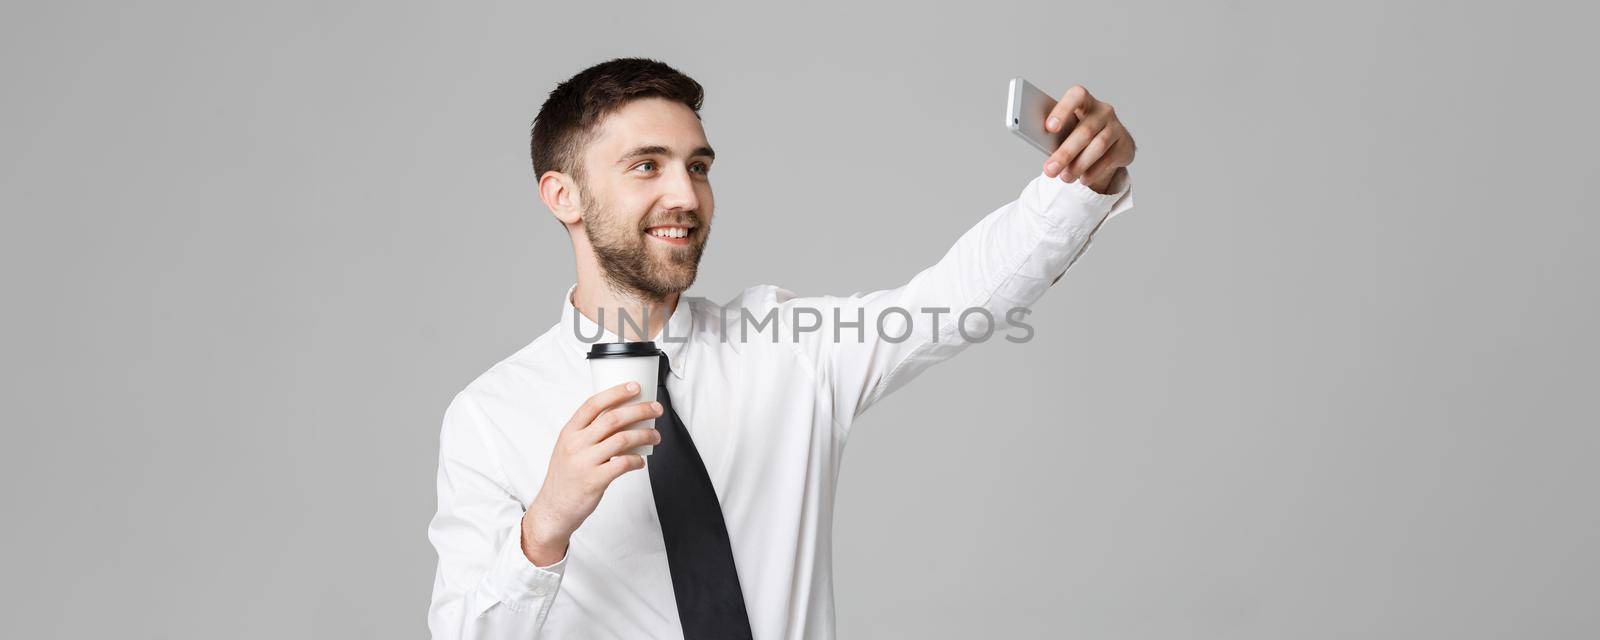 Lifestyle and Business Concept - Portrait of a handsome businessman enjoy taking a selfie with take away cup of coffee. Isolated White background. Copy Space.